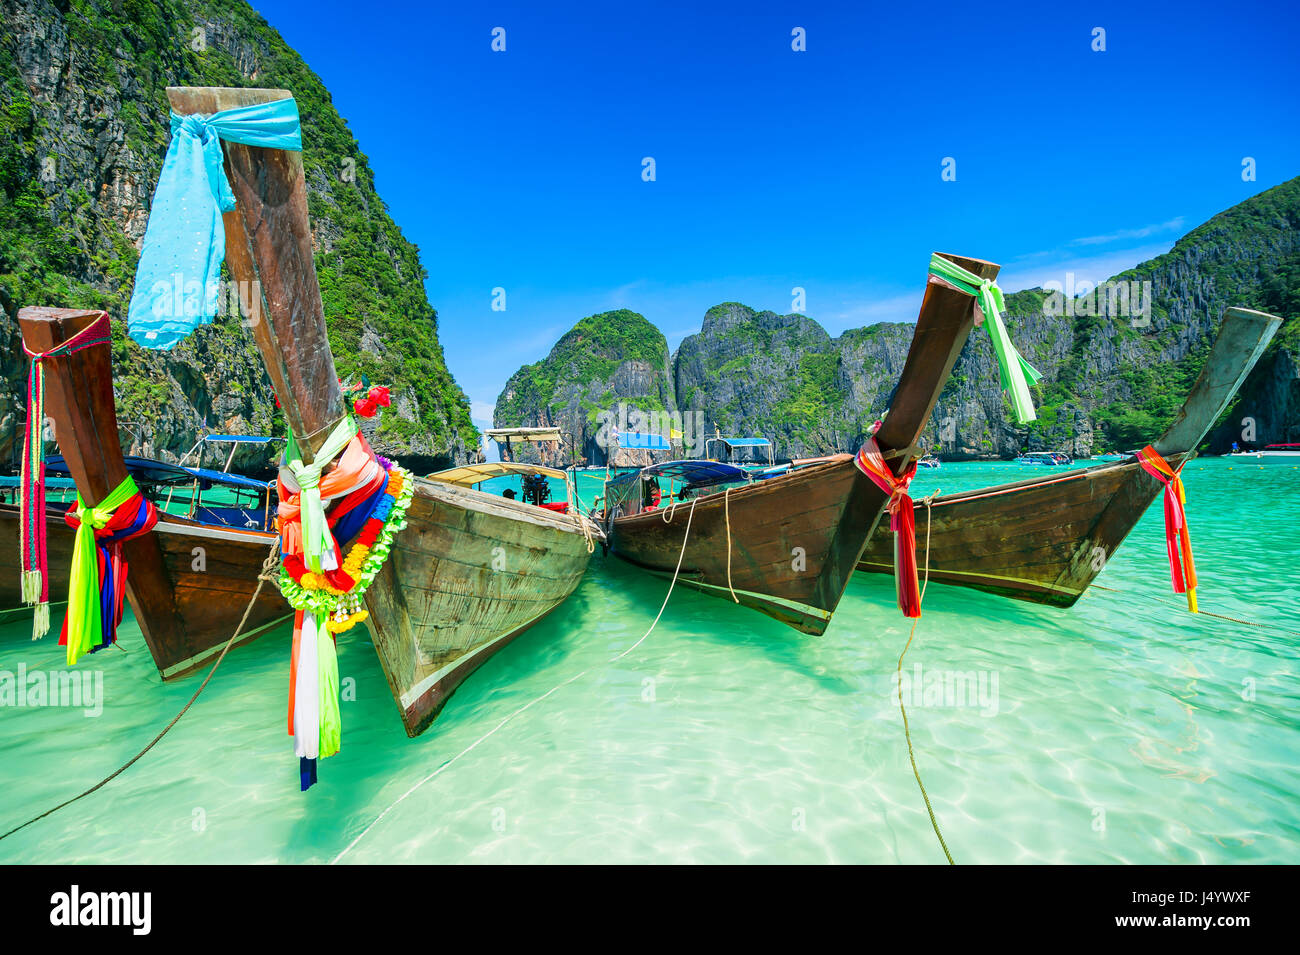 Traditional Thai wooden longtail boats with colorful sashes in the turquoise Andaman waters of Maya Bay, in Southern Thailand Stock Photo